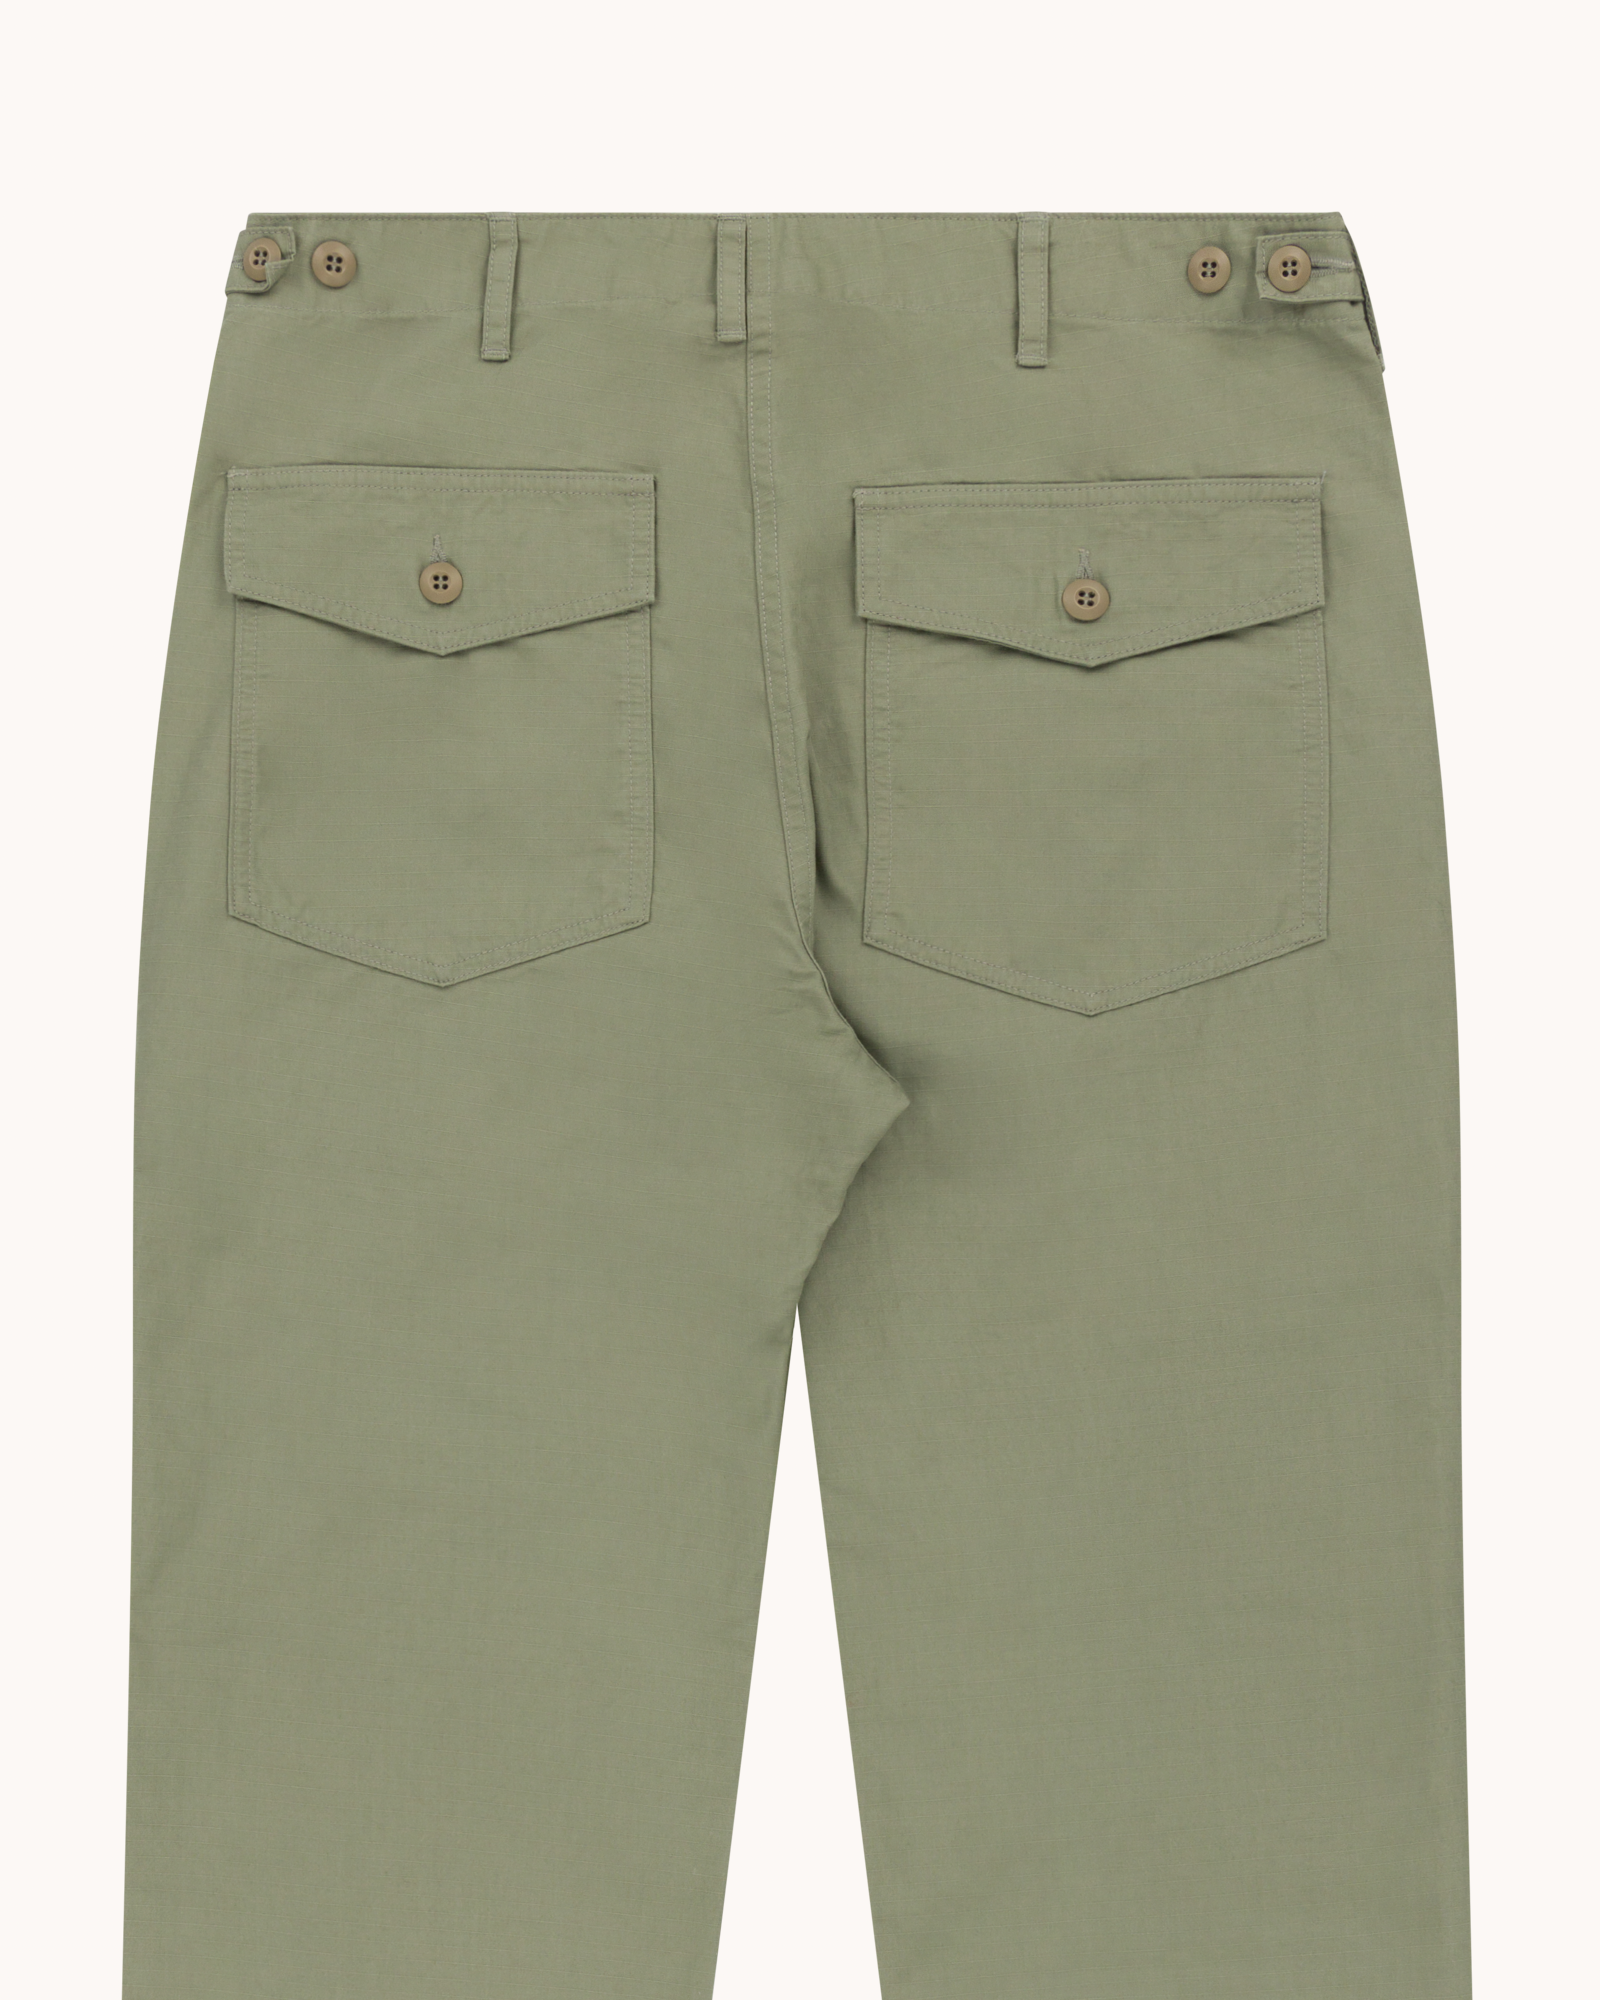 High Rise Japanese Ripstop Fatigue Pant - Light Olive Green